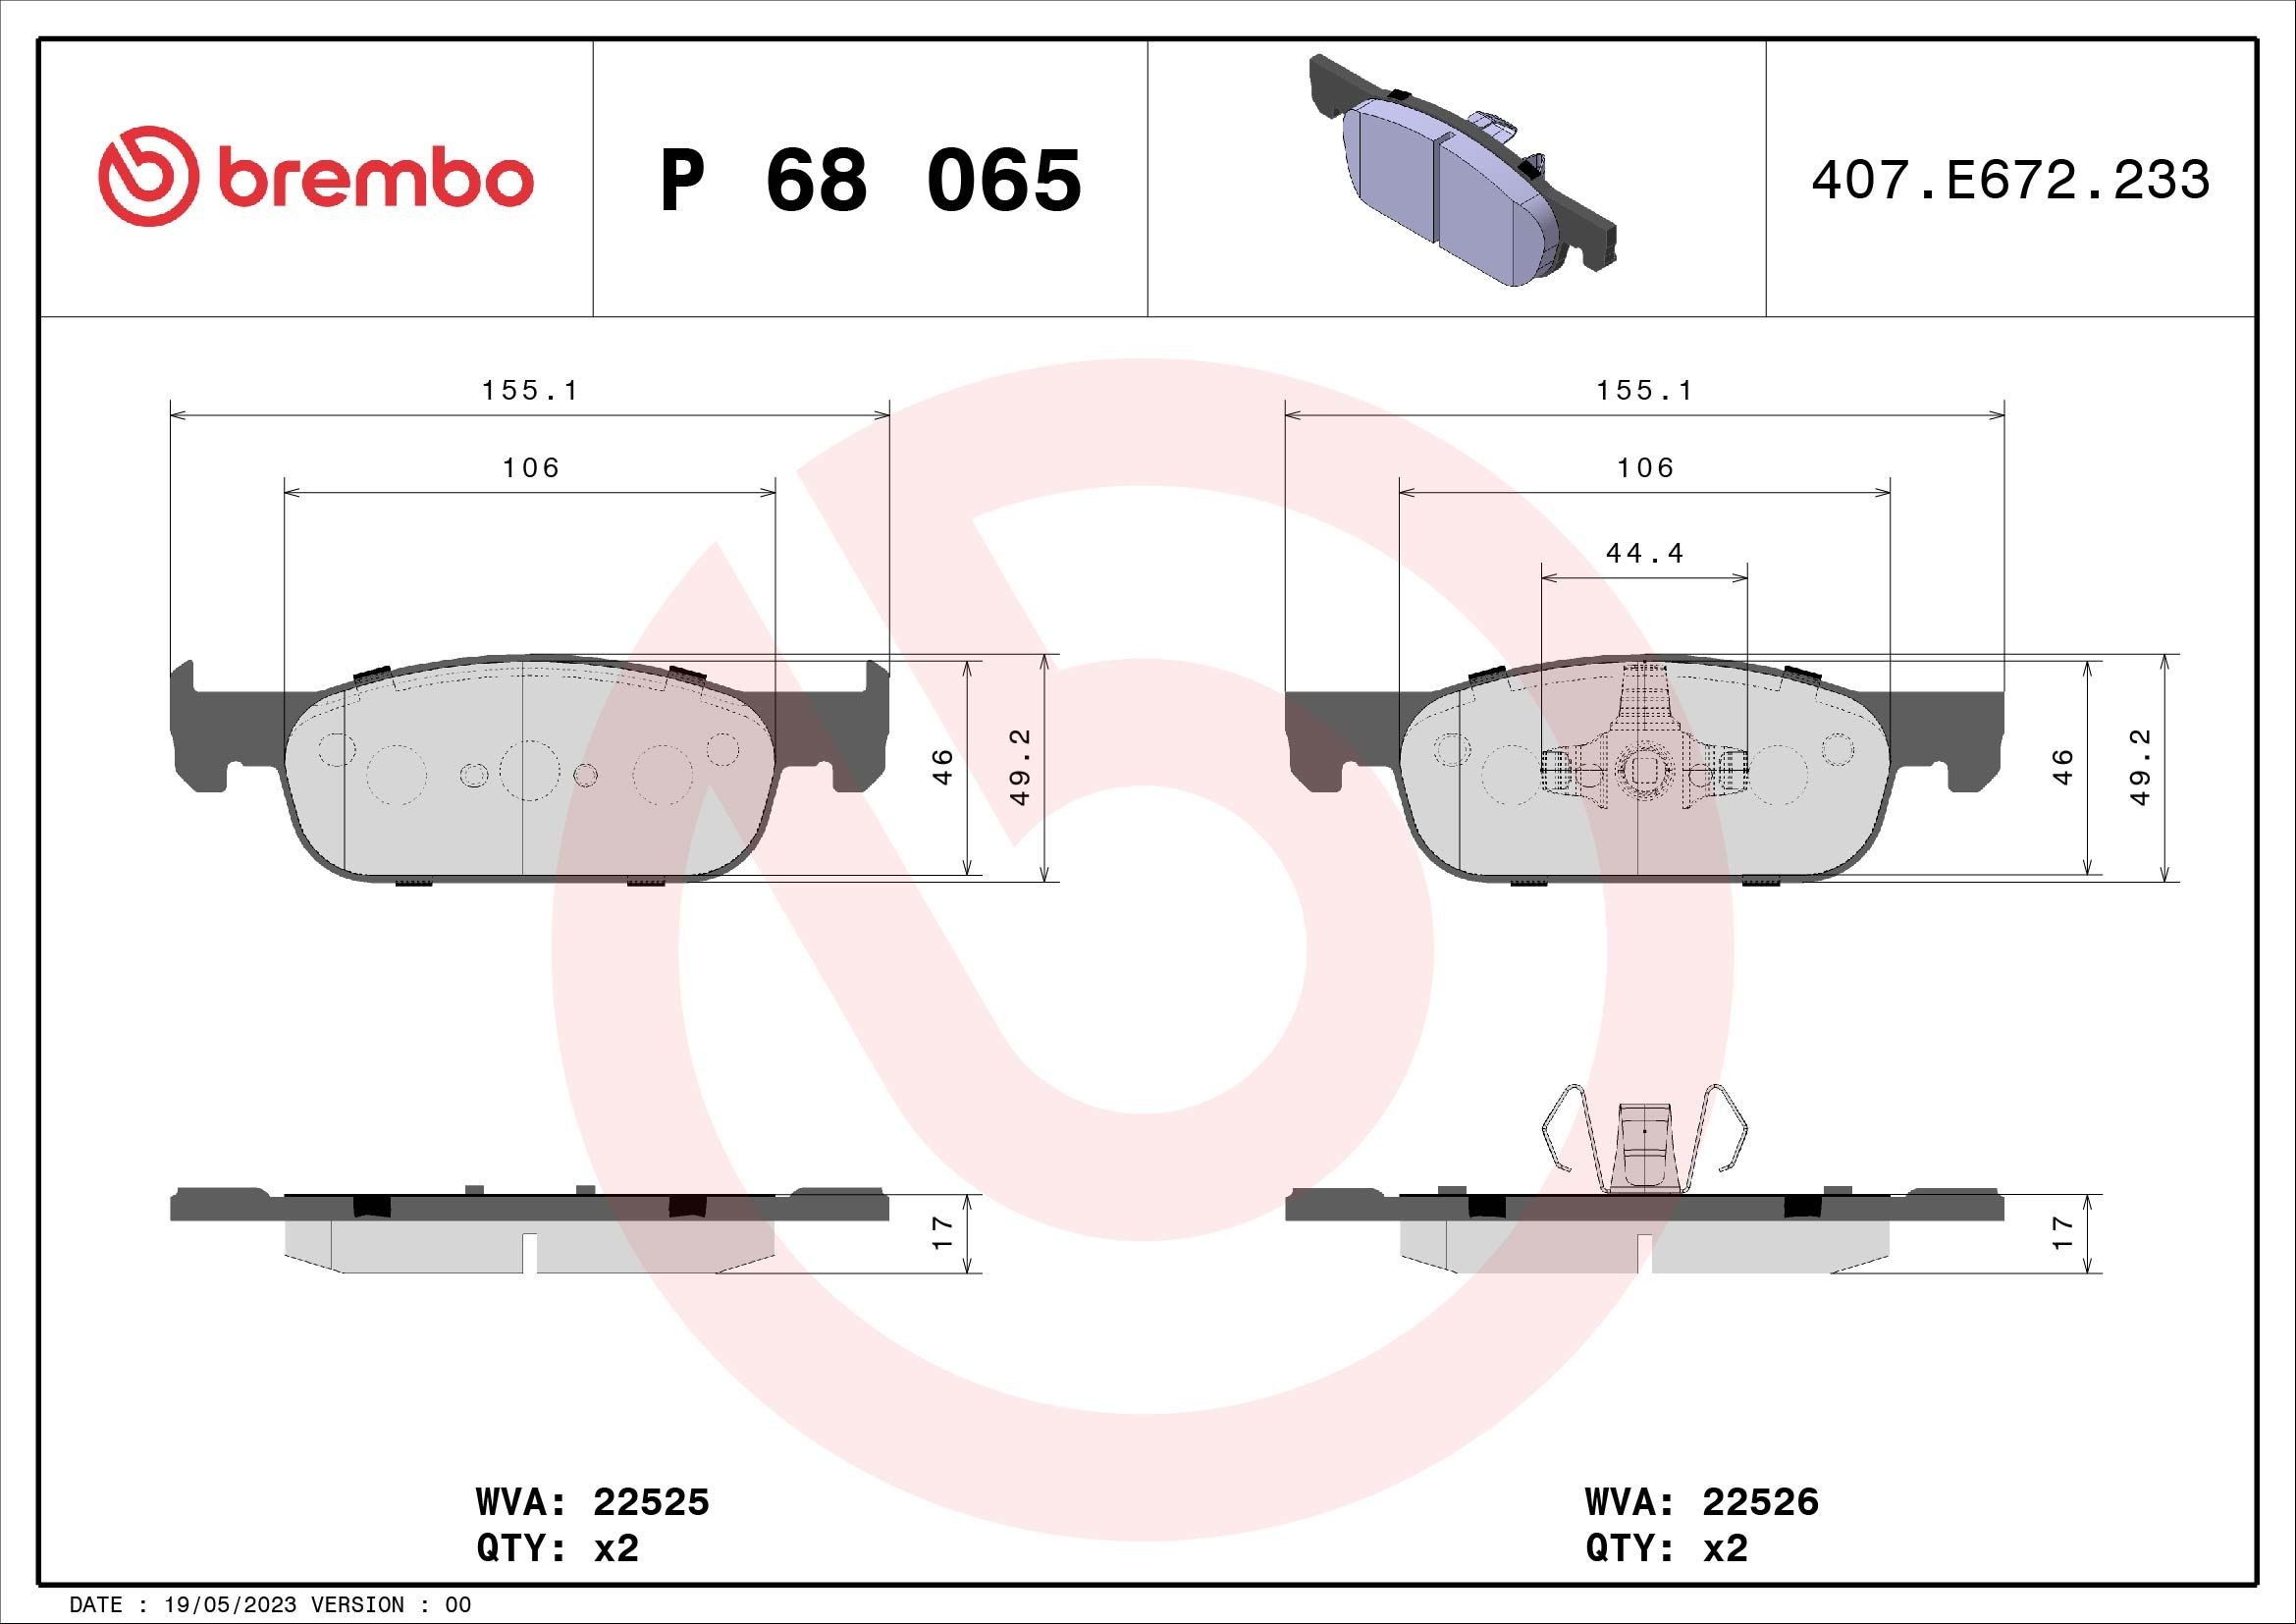 P 68 065X BREMBO Brake pad set DACIA excl. wear warning contact, without accessories